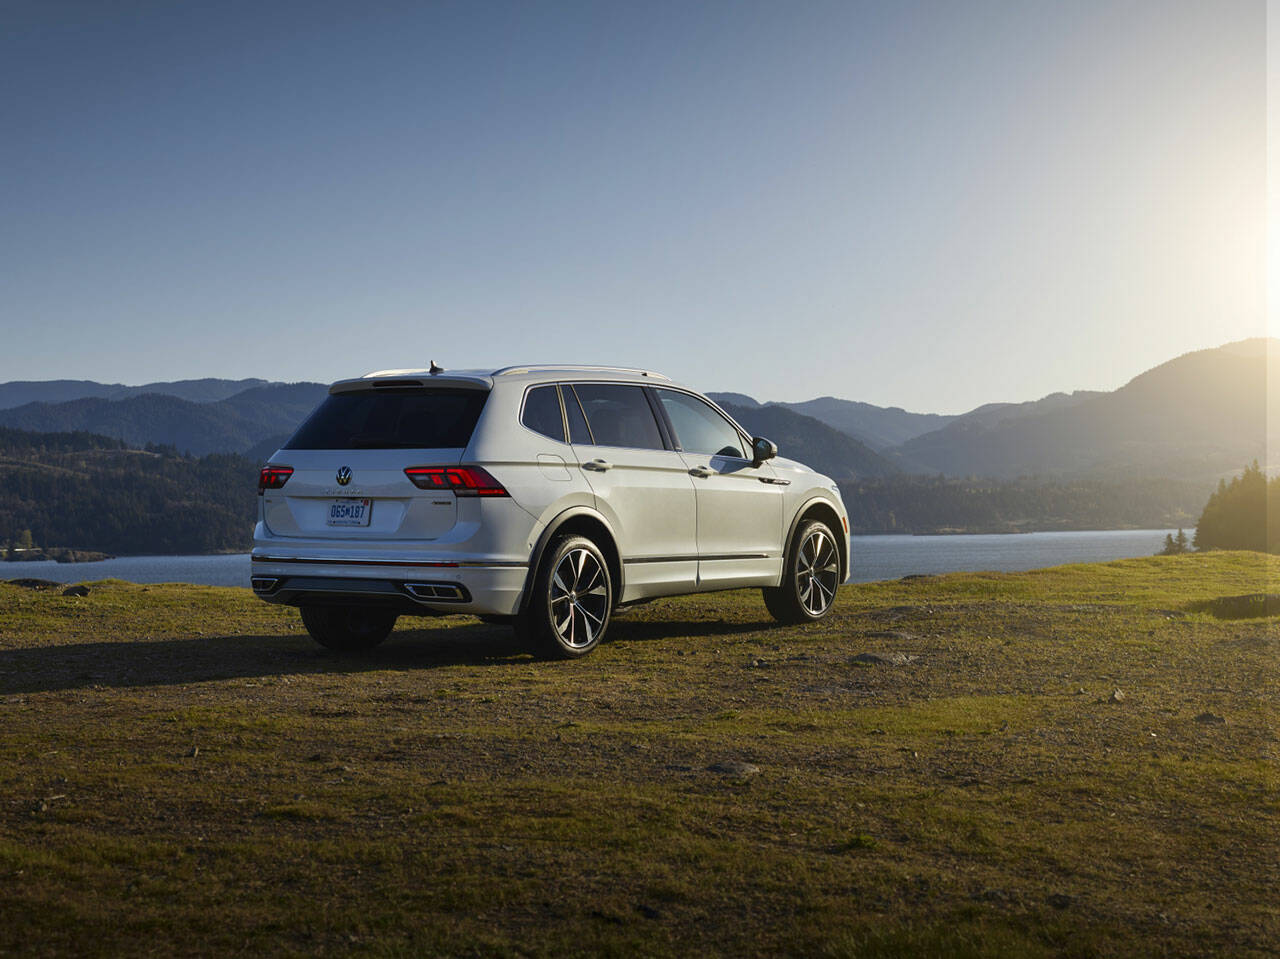 The 2022 Volkswagen Tiguan has seating for up to seven passengers when equipped with a third-row seat. (Volkswagen)